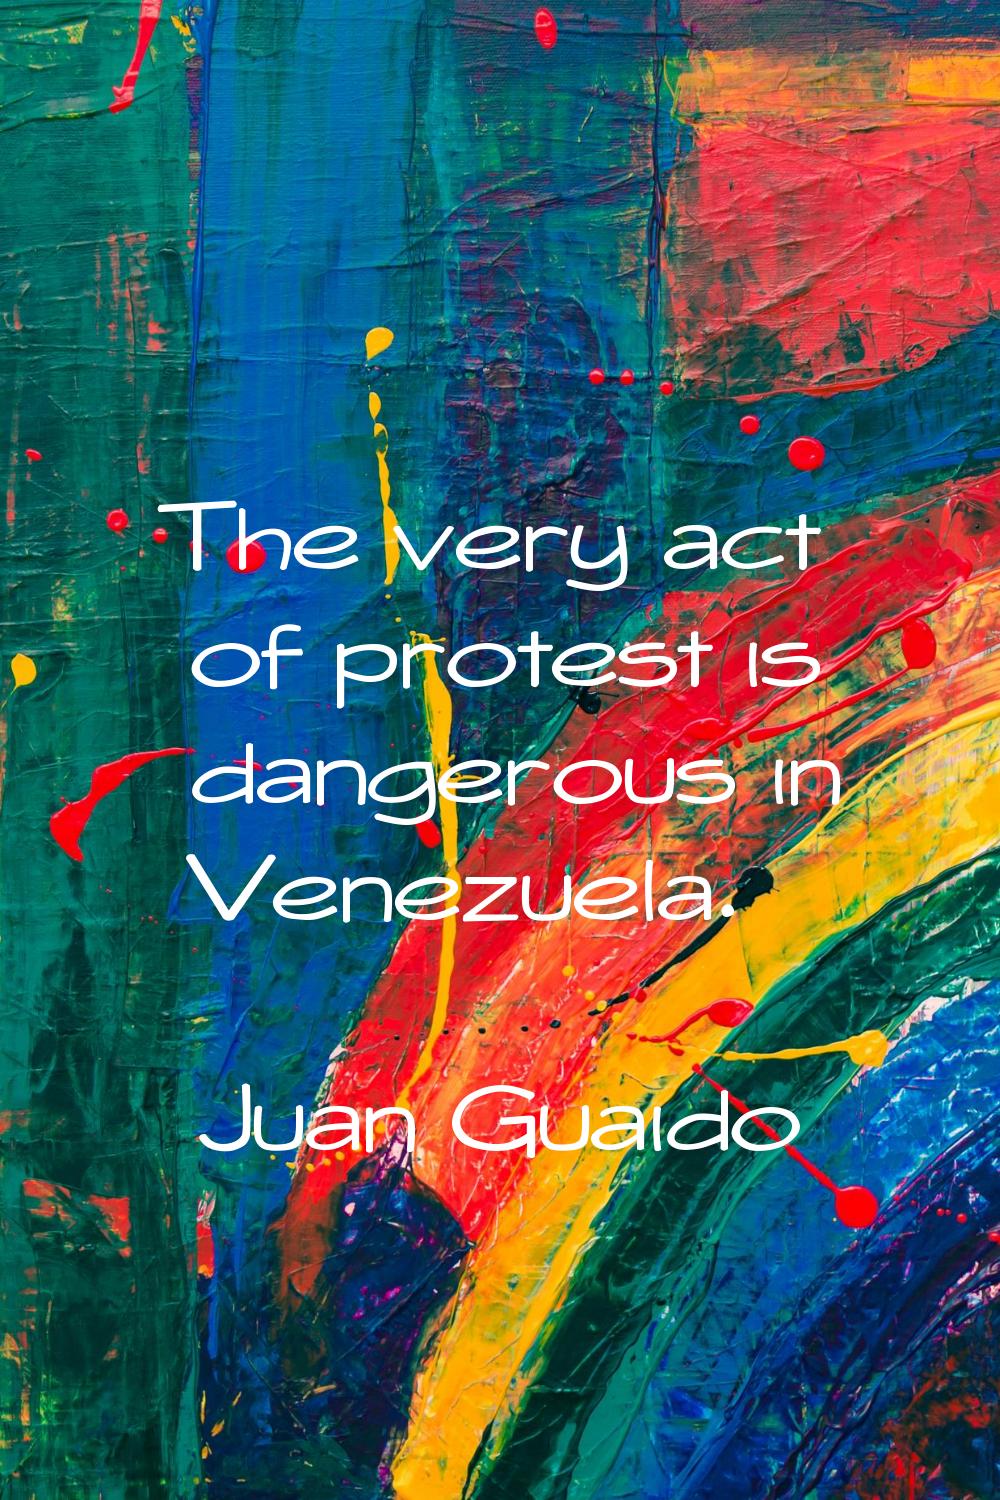 The very act of protest is dangerous in Venezuela.